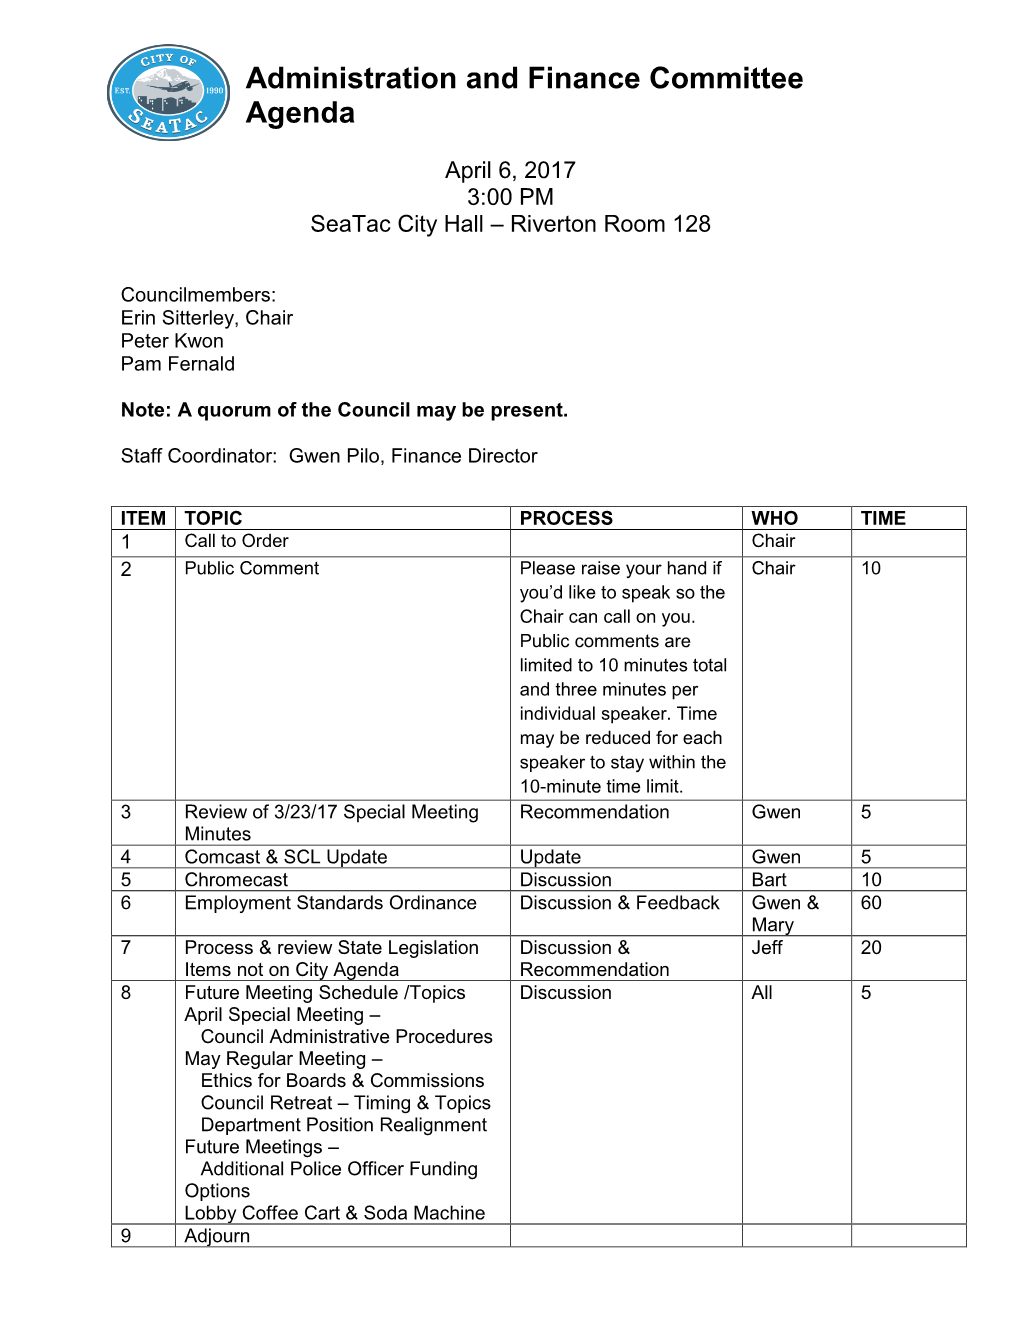 Administration and Finance Committee Agenda